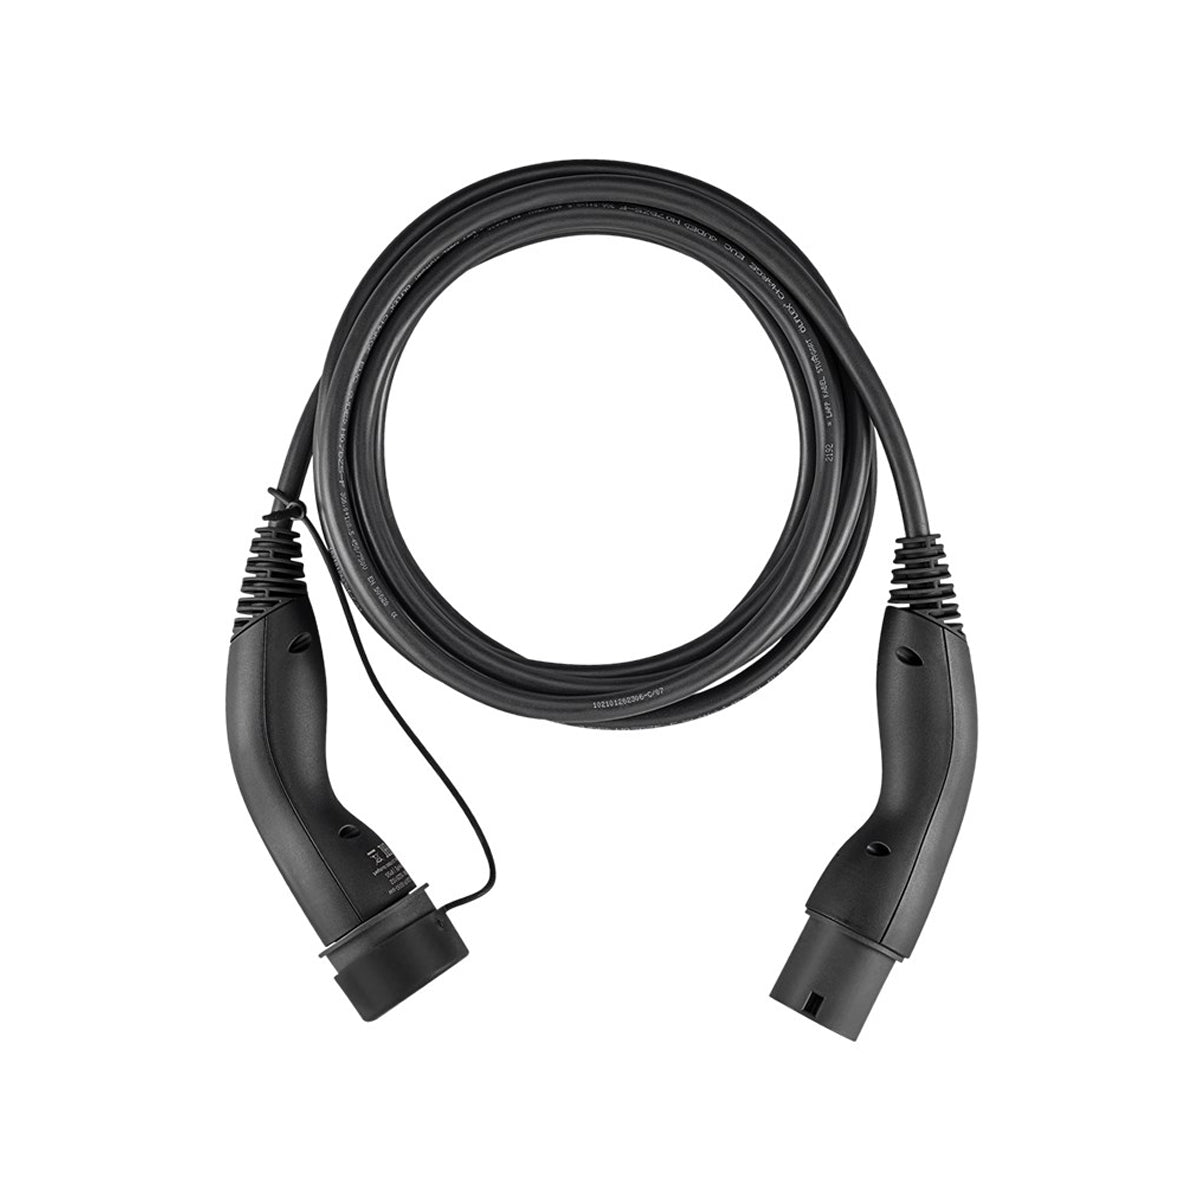 Standard charging cable type 2 (7.4 kW) 7m, black